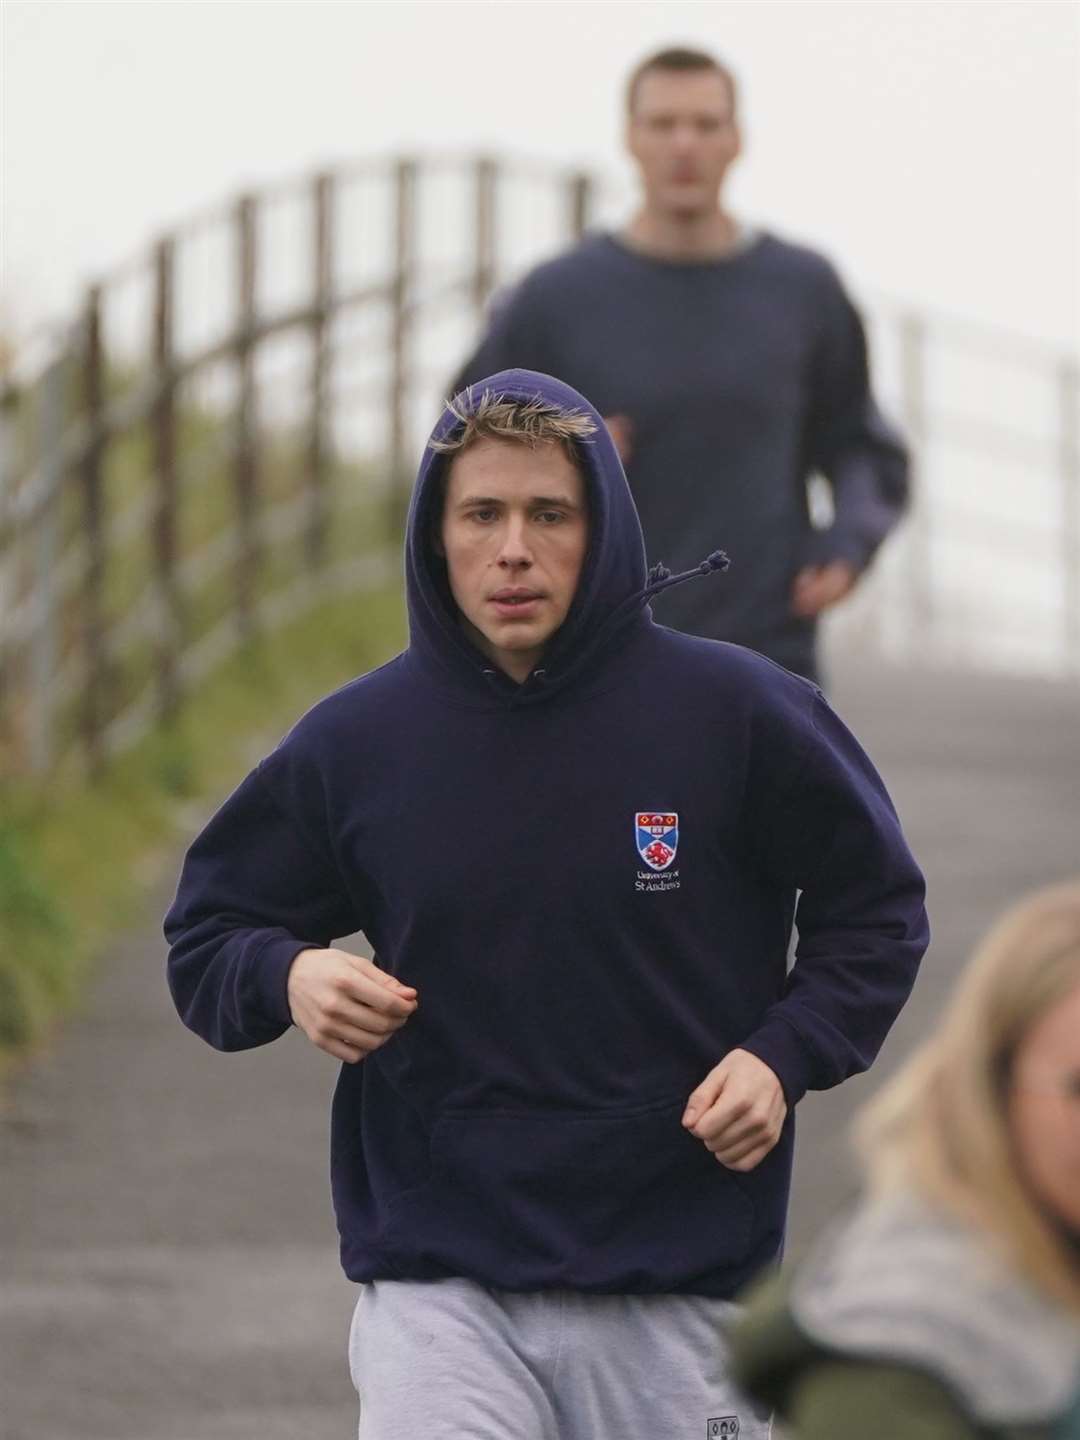 Actor Ed McVey jogging in St Andrews during filming for the next series of The Crown (Andrew Milligan/PA)